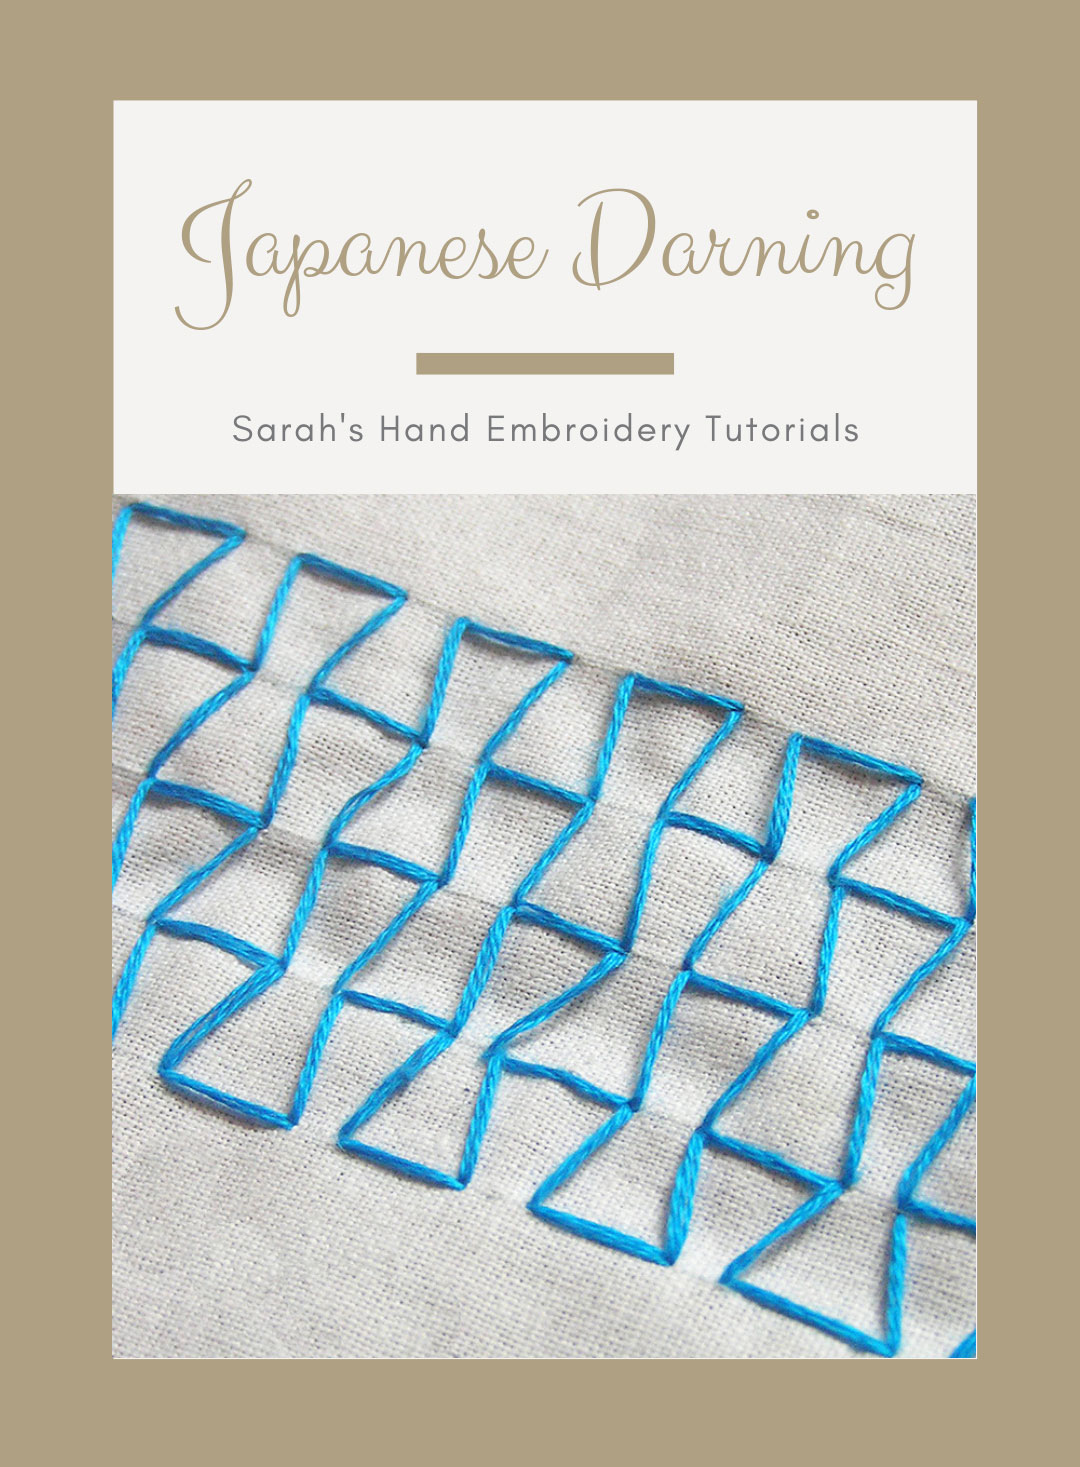 the Japanese darning stitch - with video tutorial